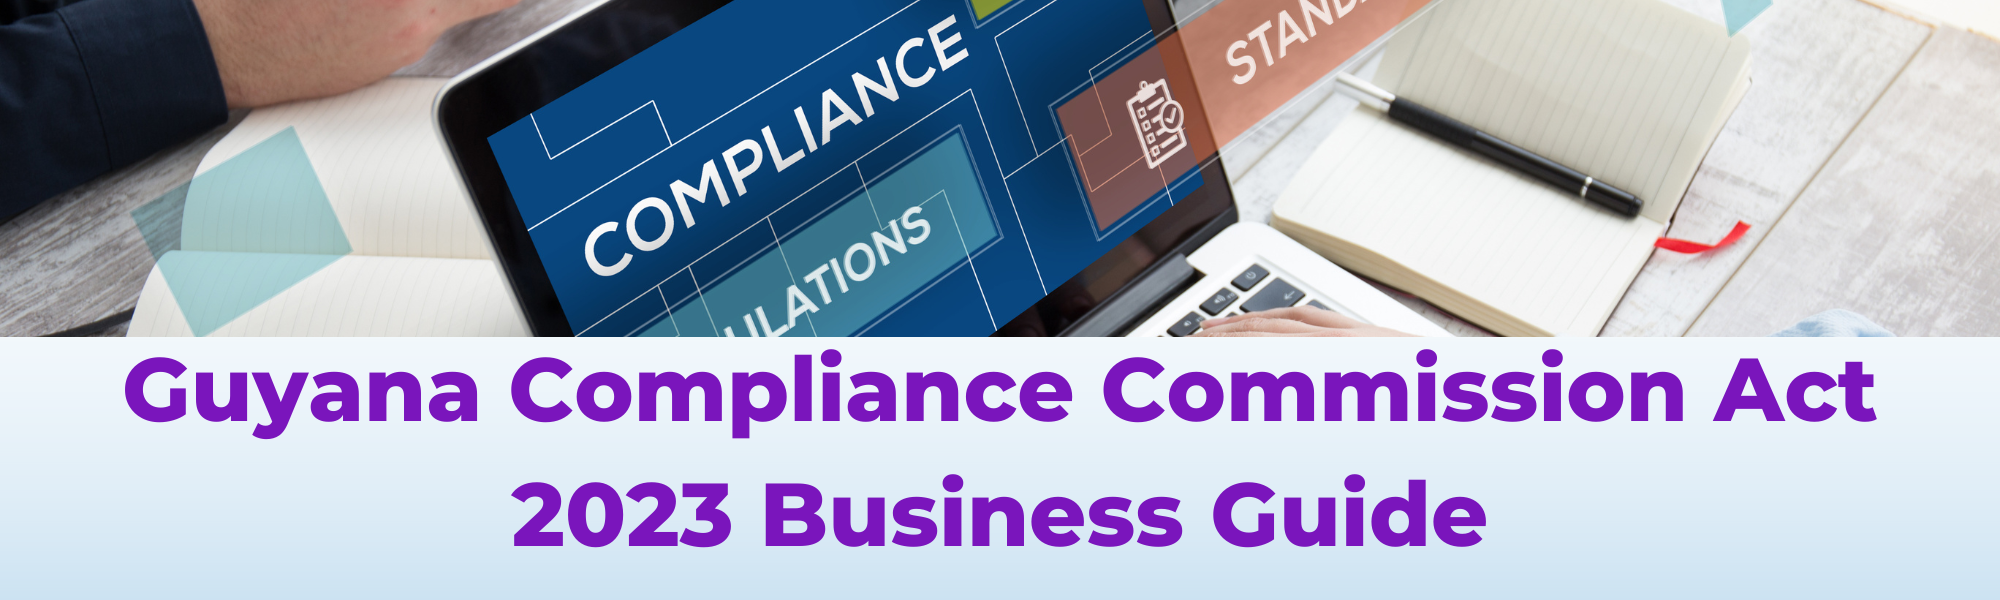 Guyana Compliance Commission Act 2023 Business Guide